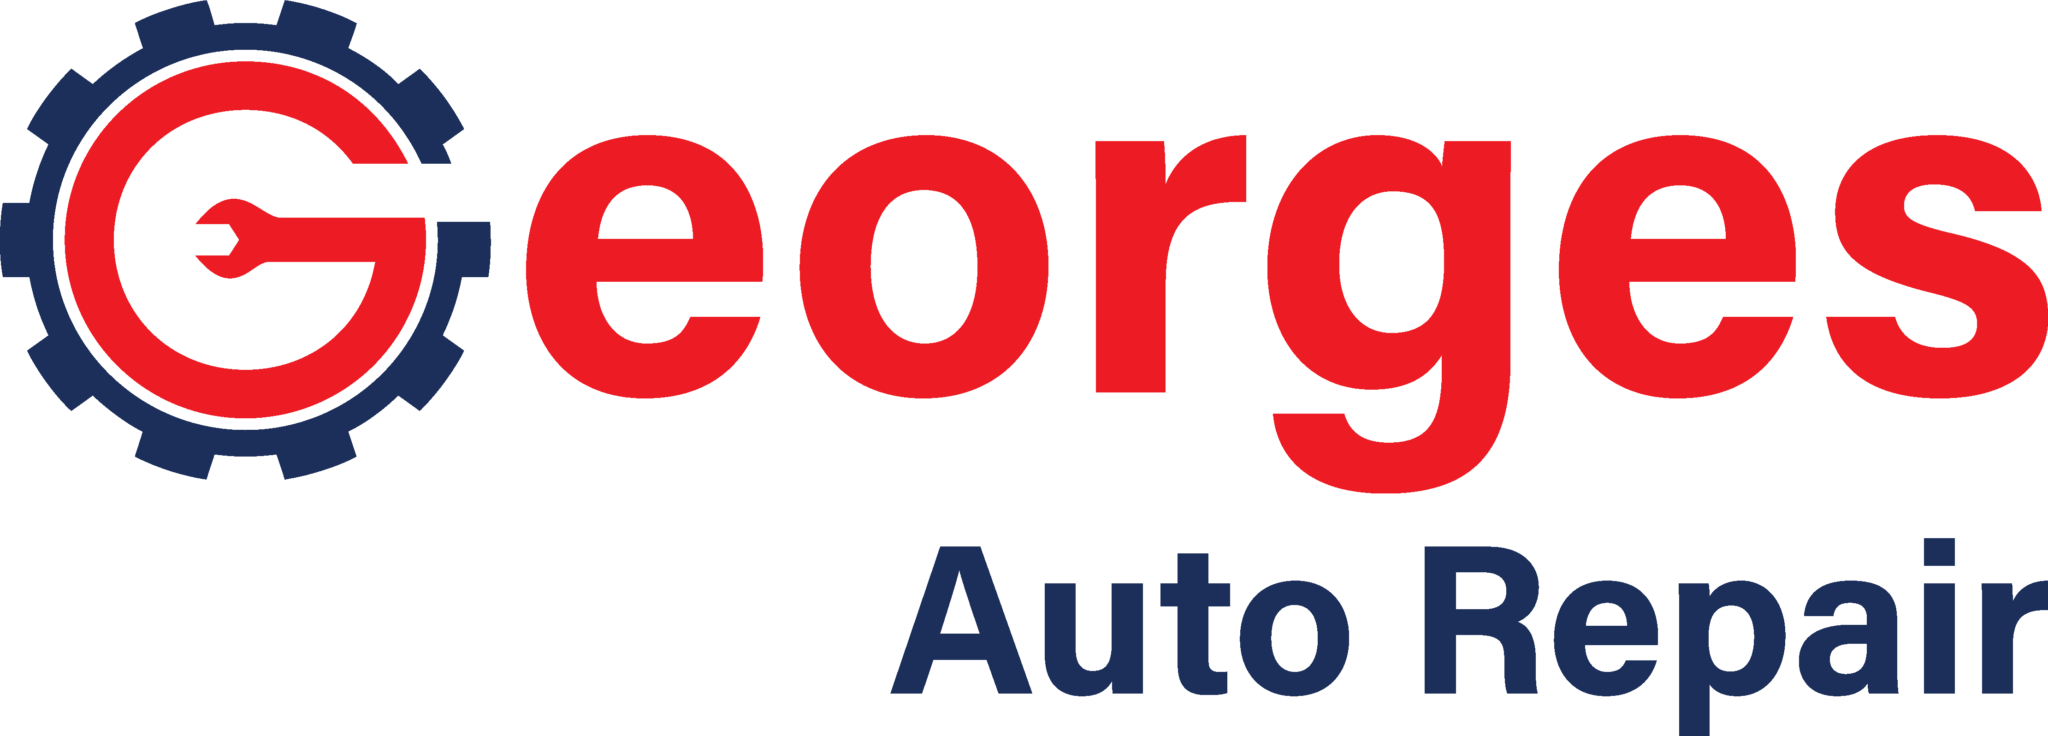 Georges-Auto-Repair-Logo-PNG-2048x736-1.png